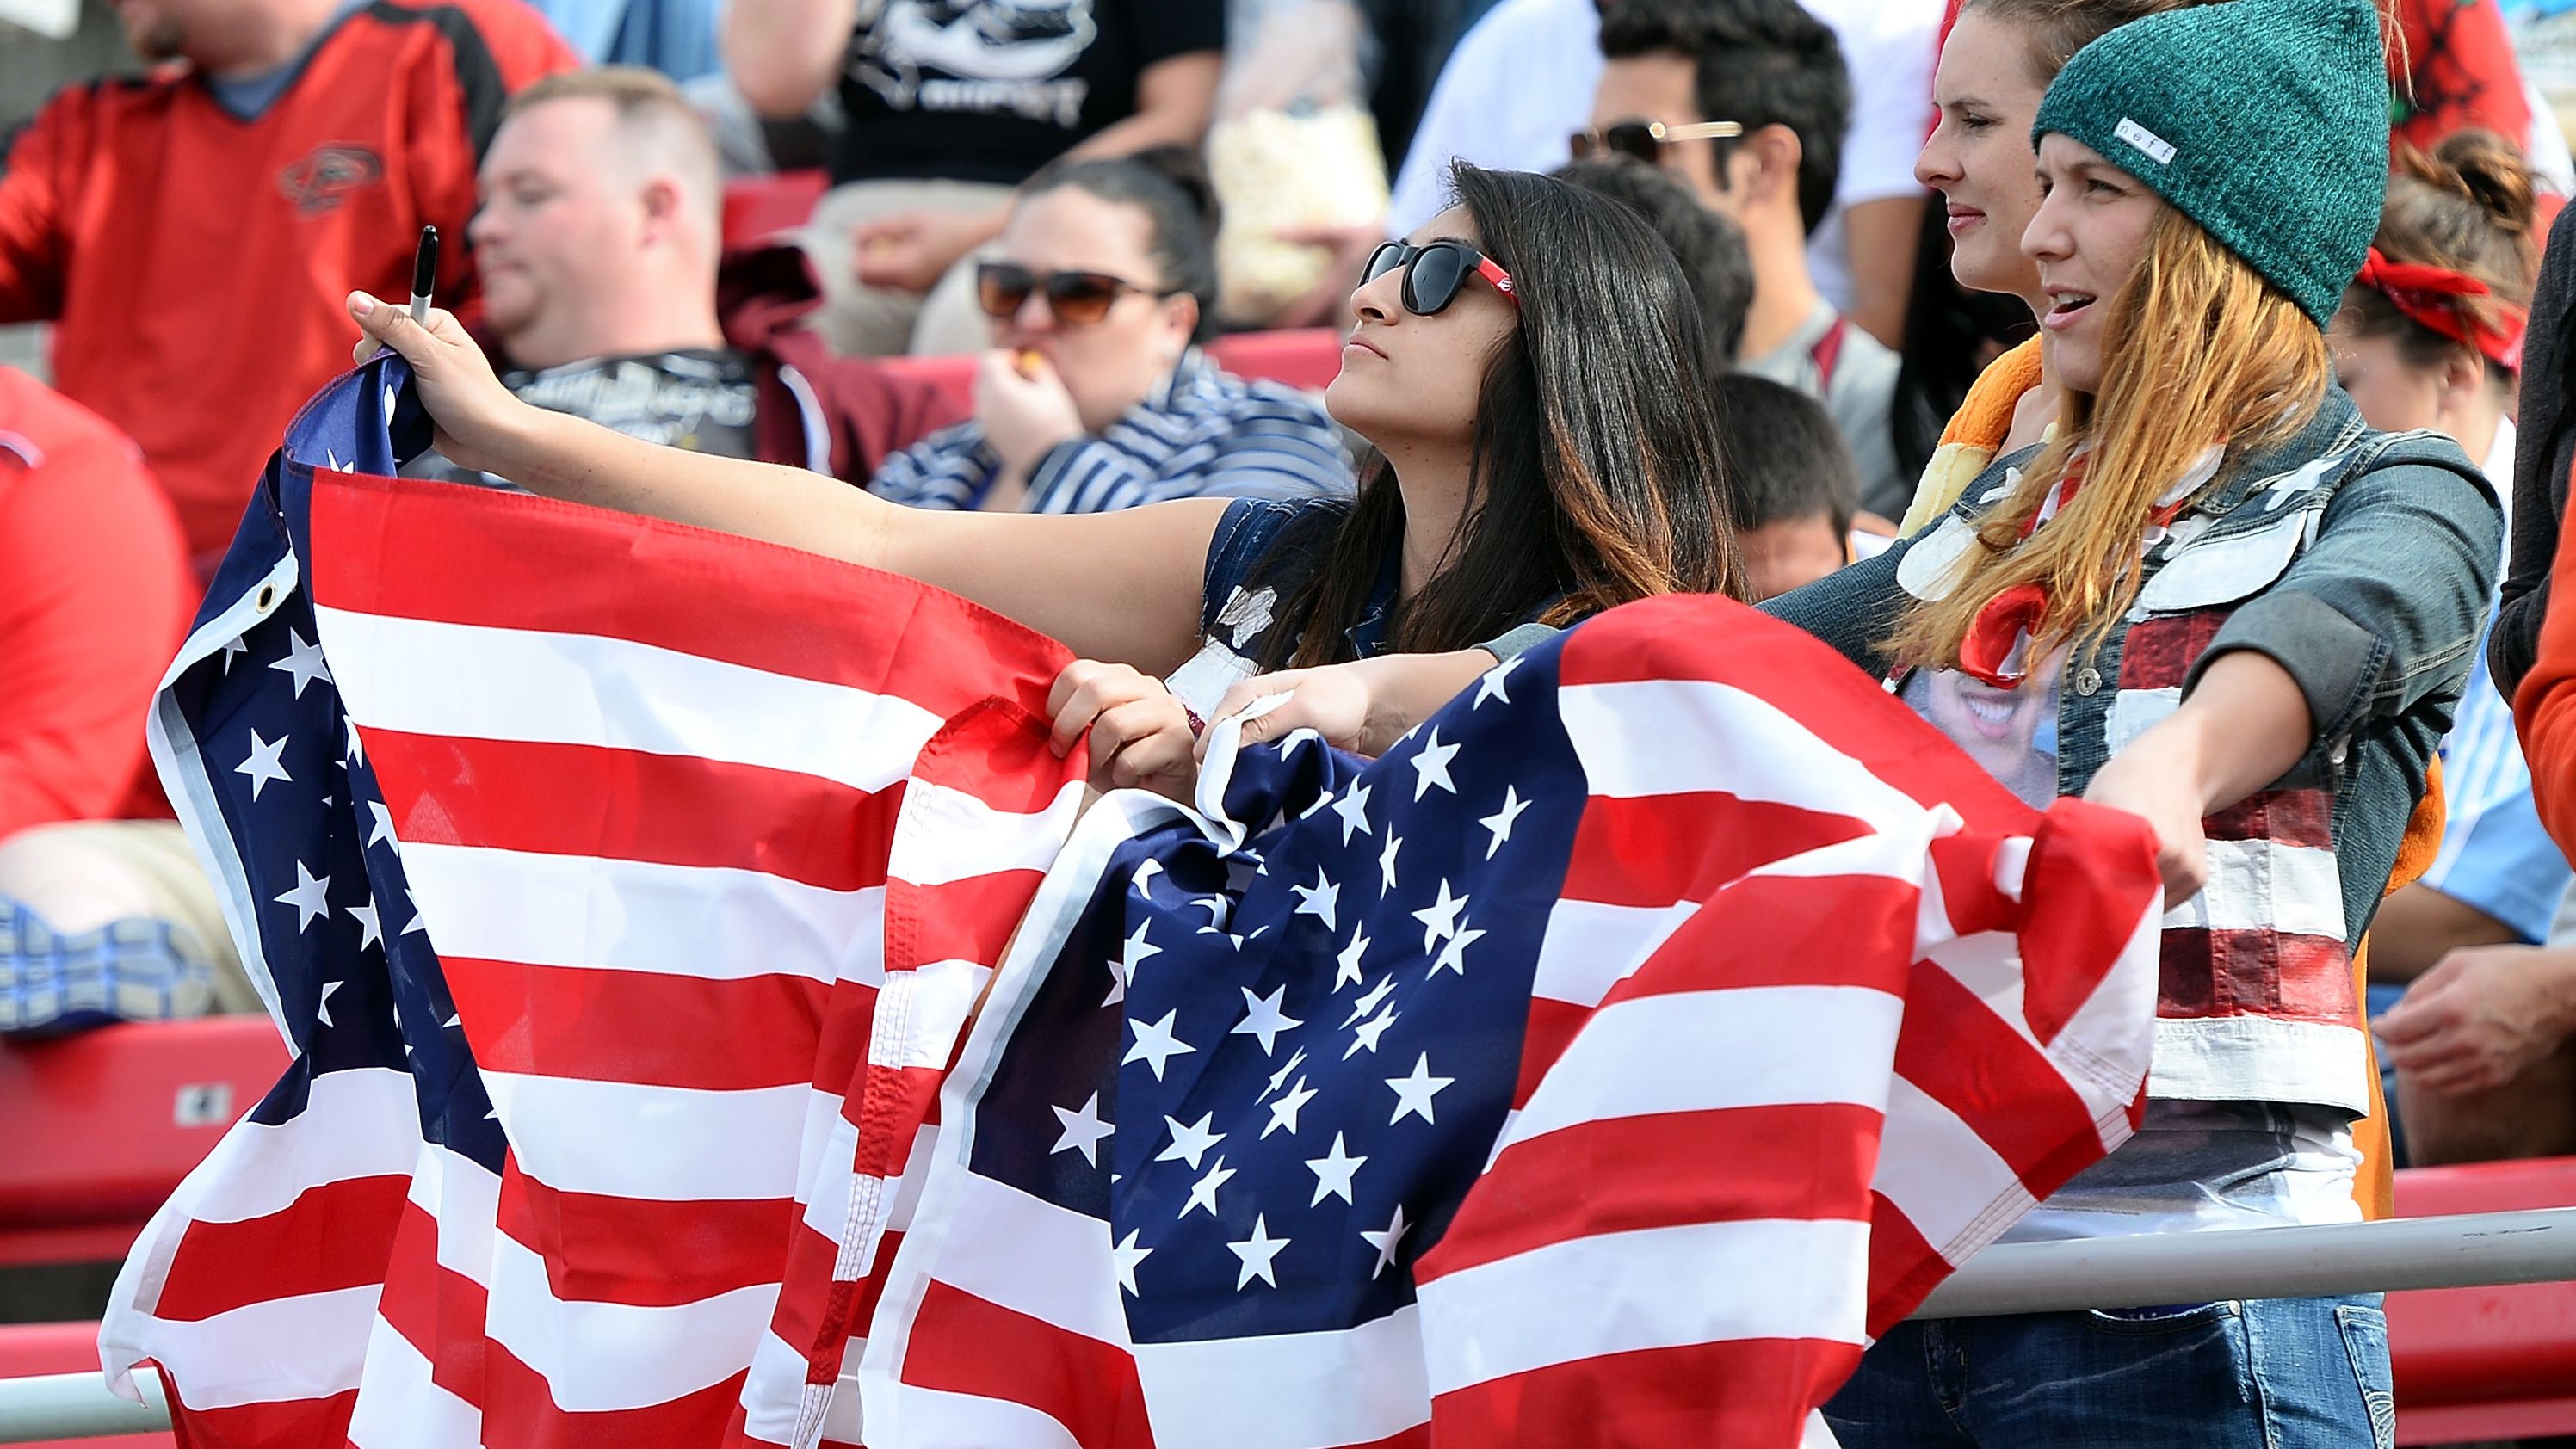 Two fans cheer on the American team during the recent Las Vegas leg of the HSBC Sevens World Series.